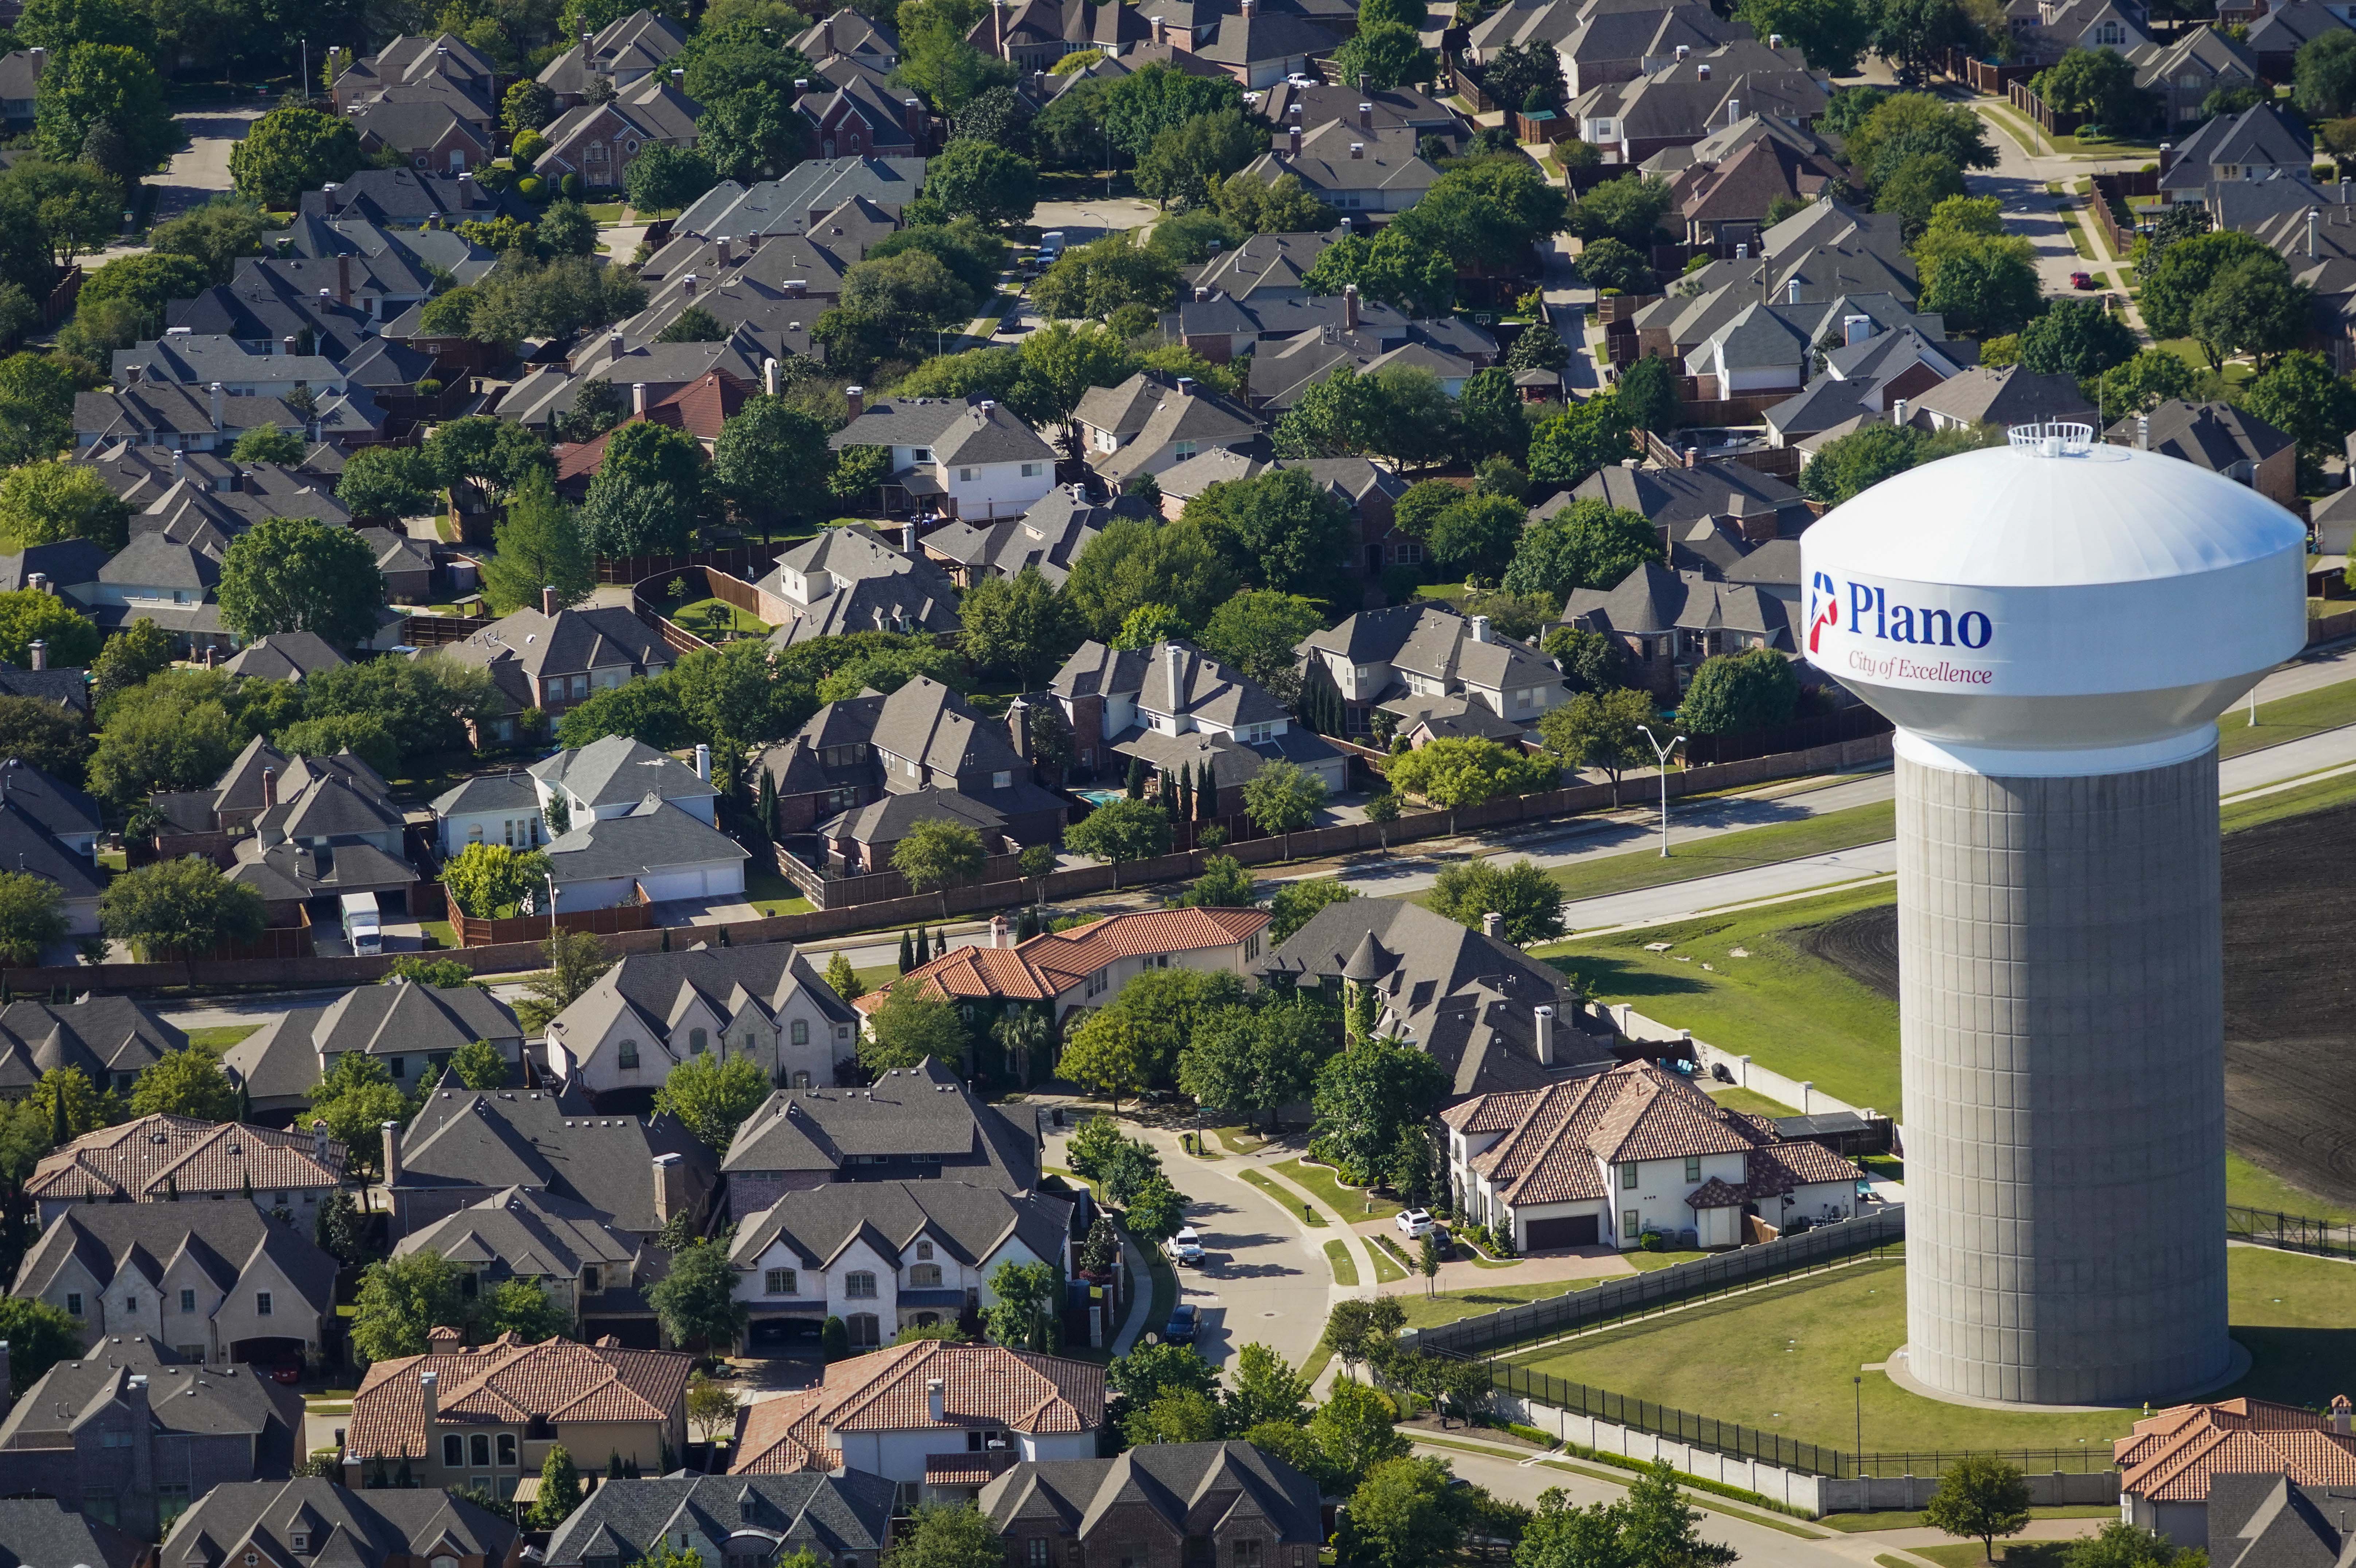 From a farming community to Texas' 9th largest city: Plano has